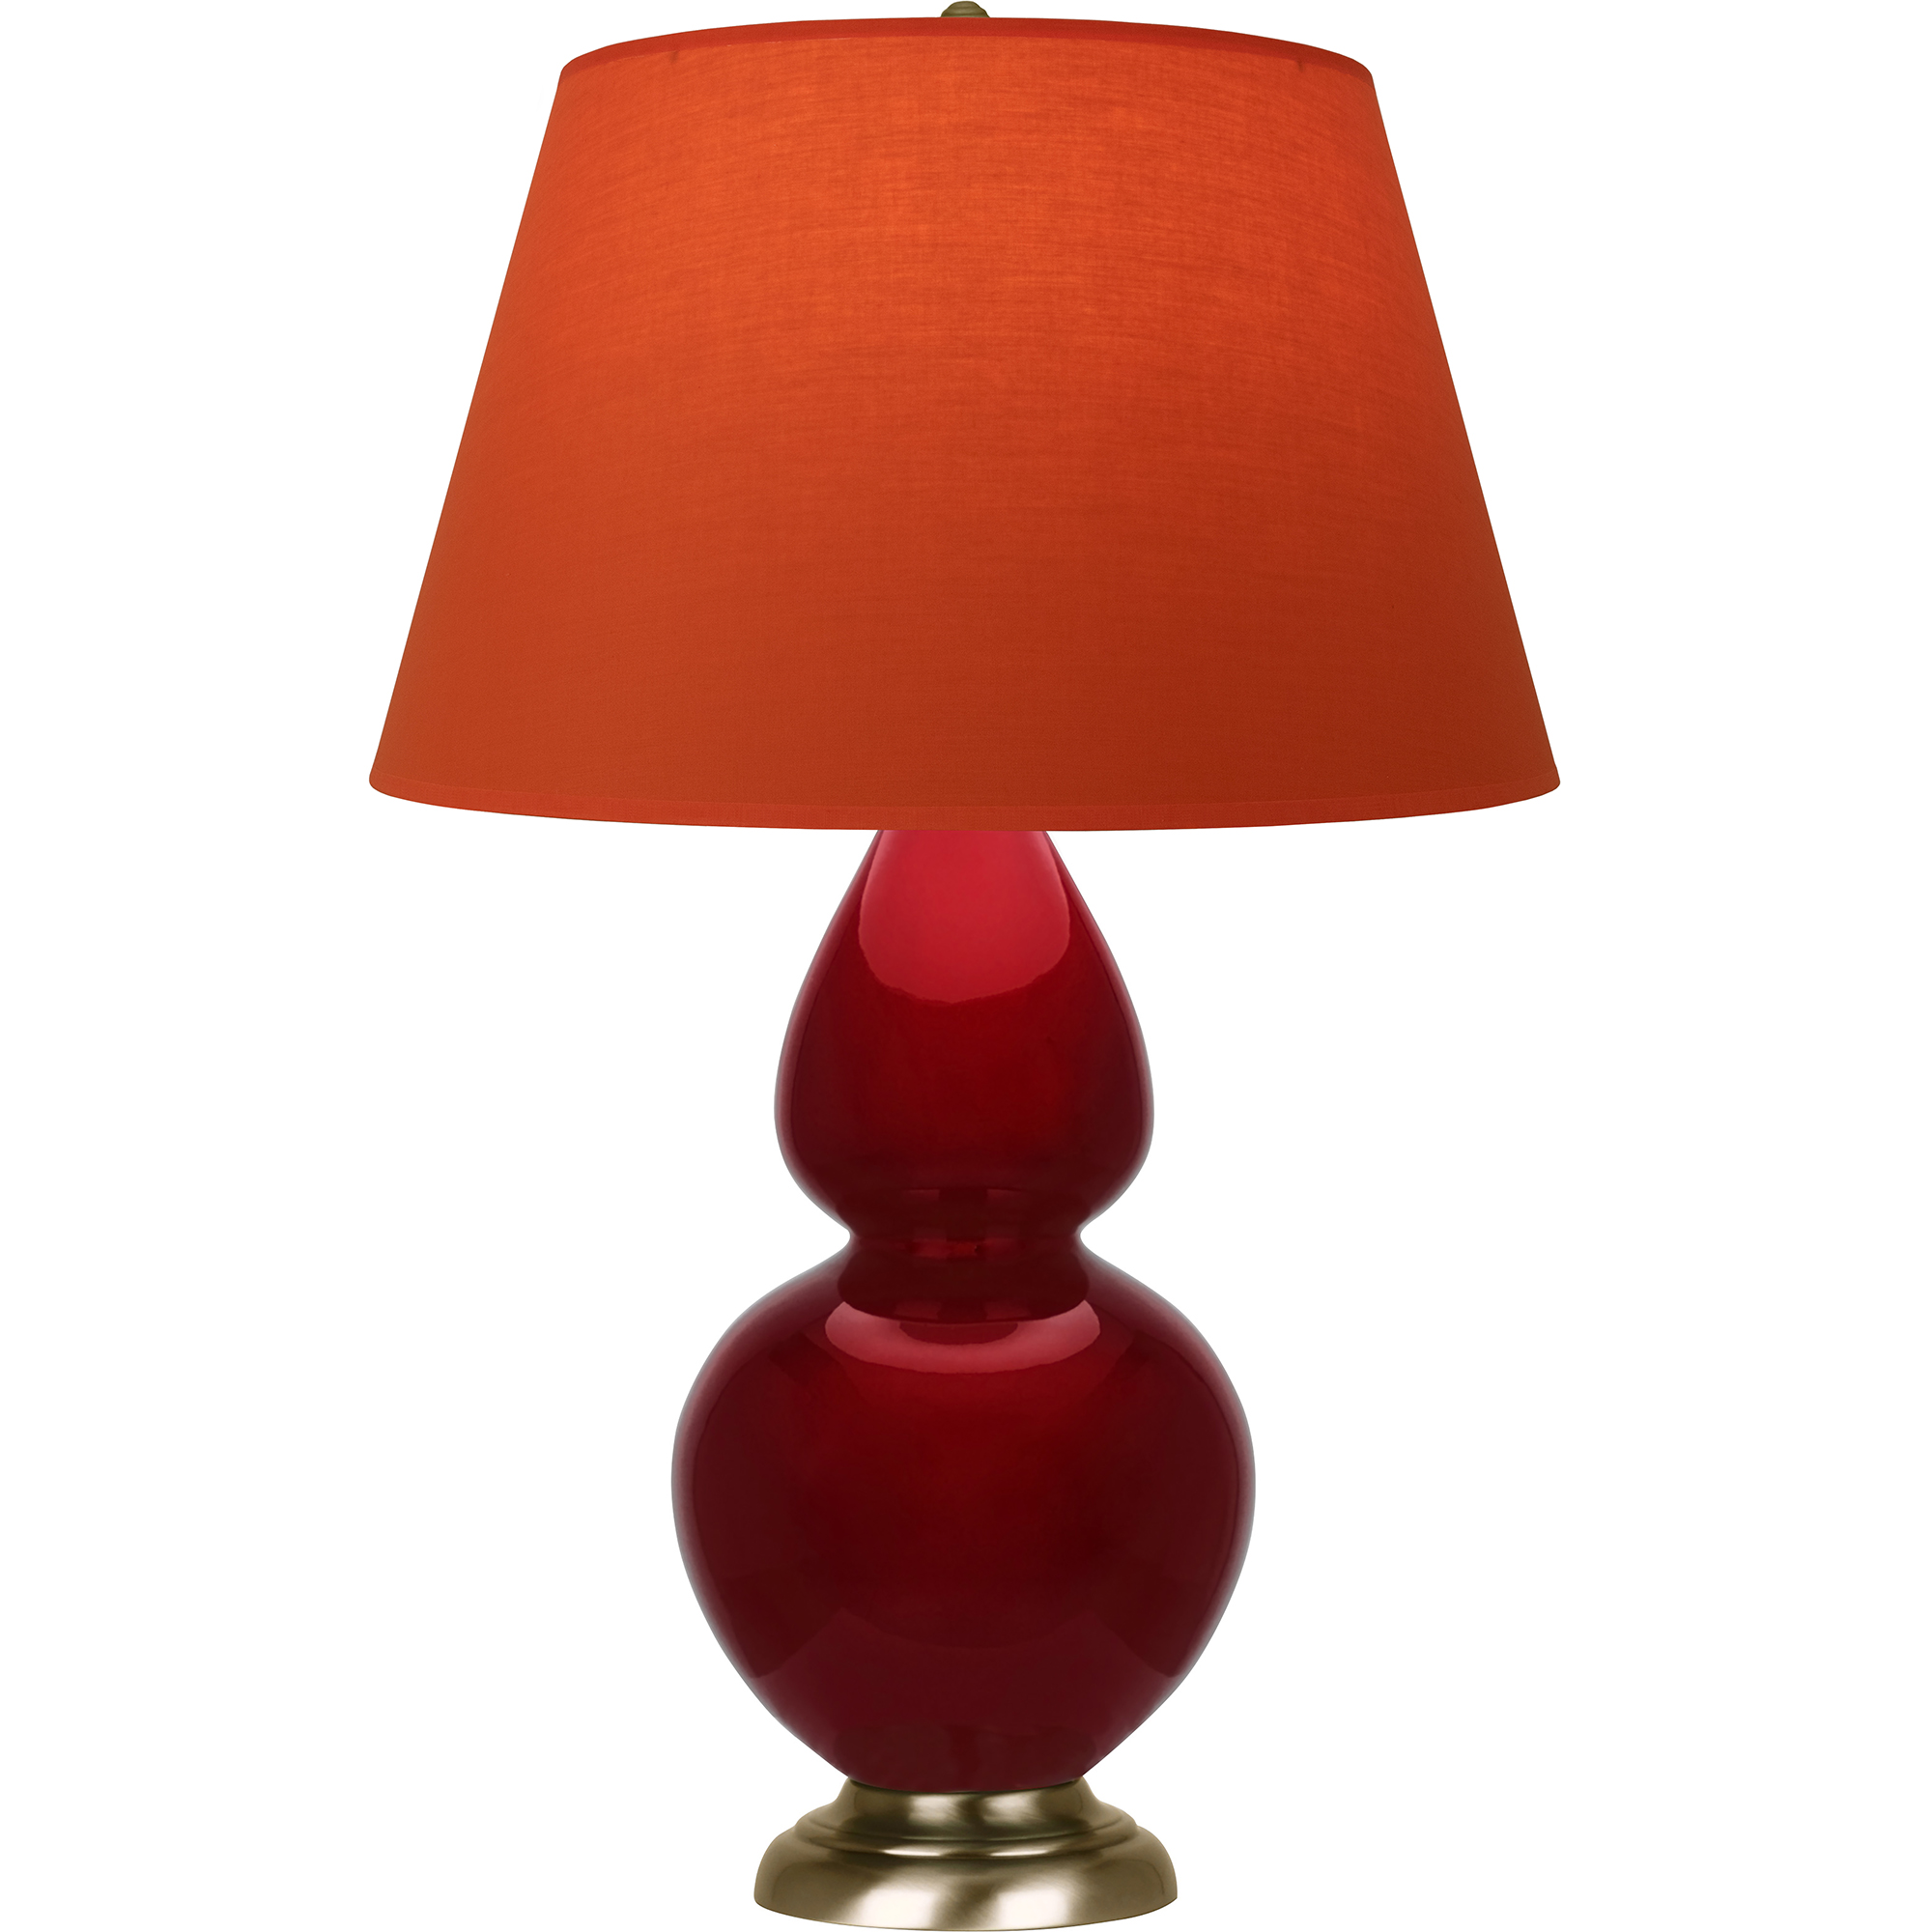 Double Gourd Table Lamp Style #SA20T